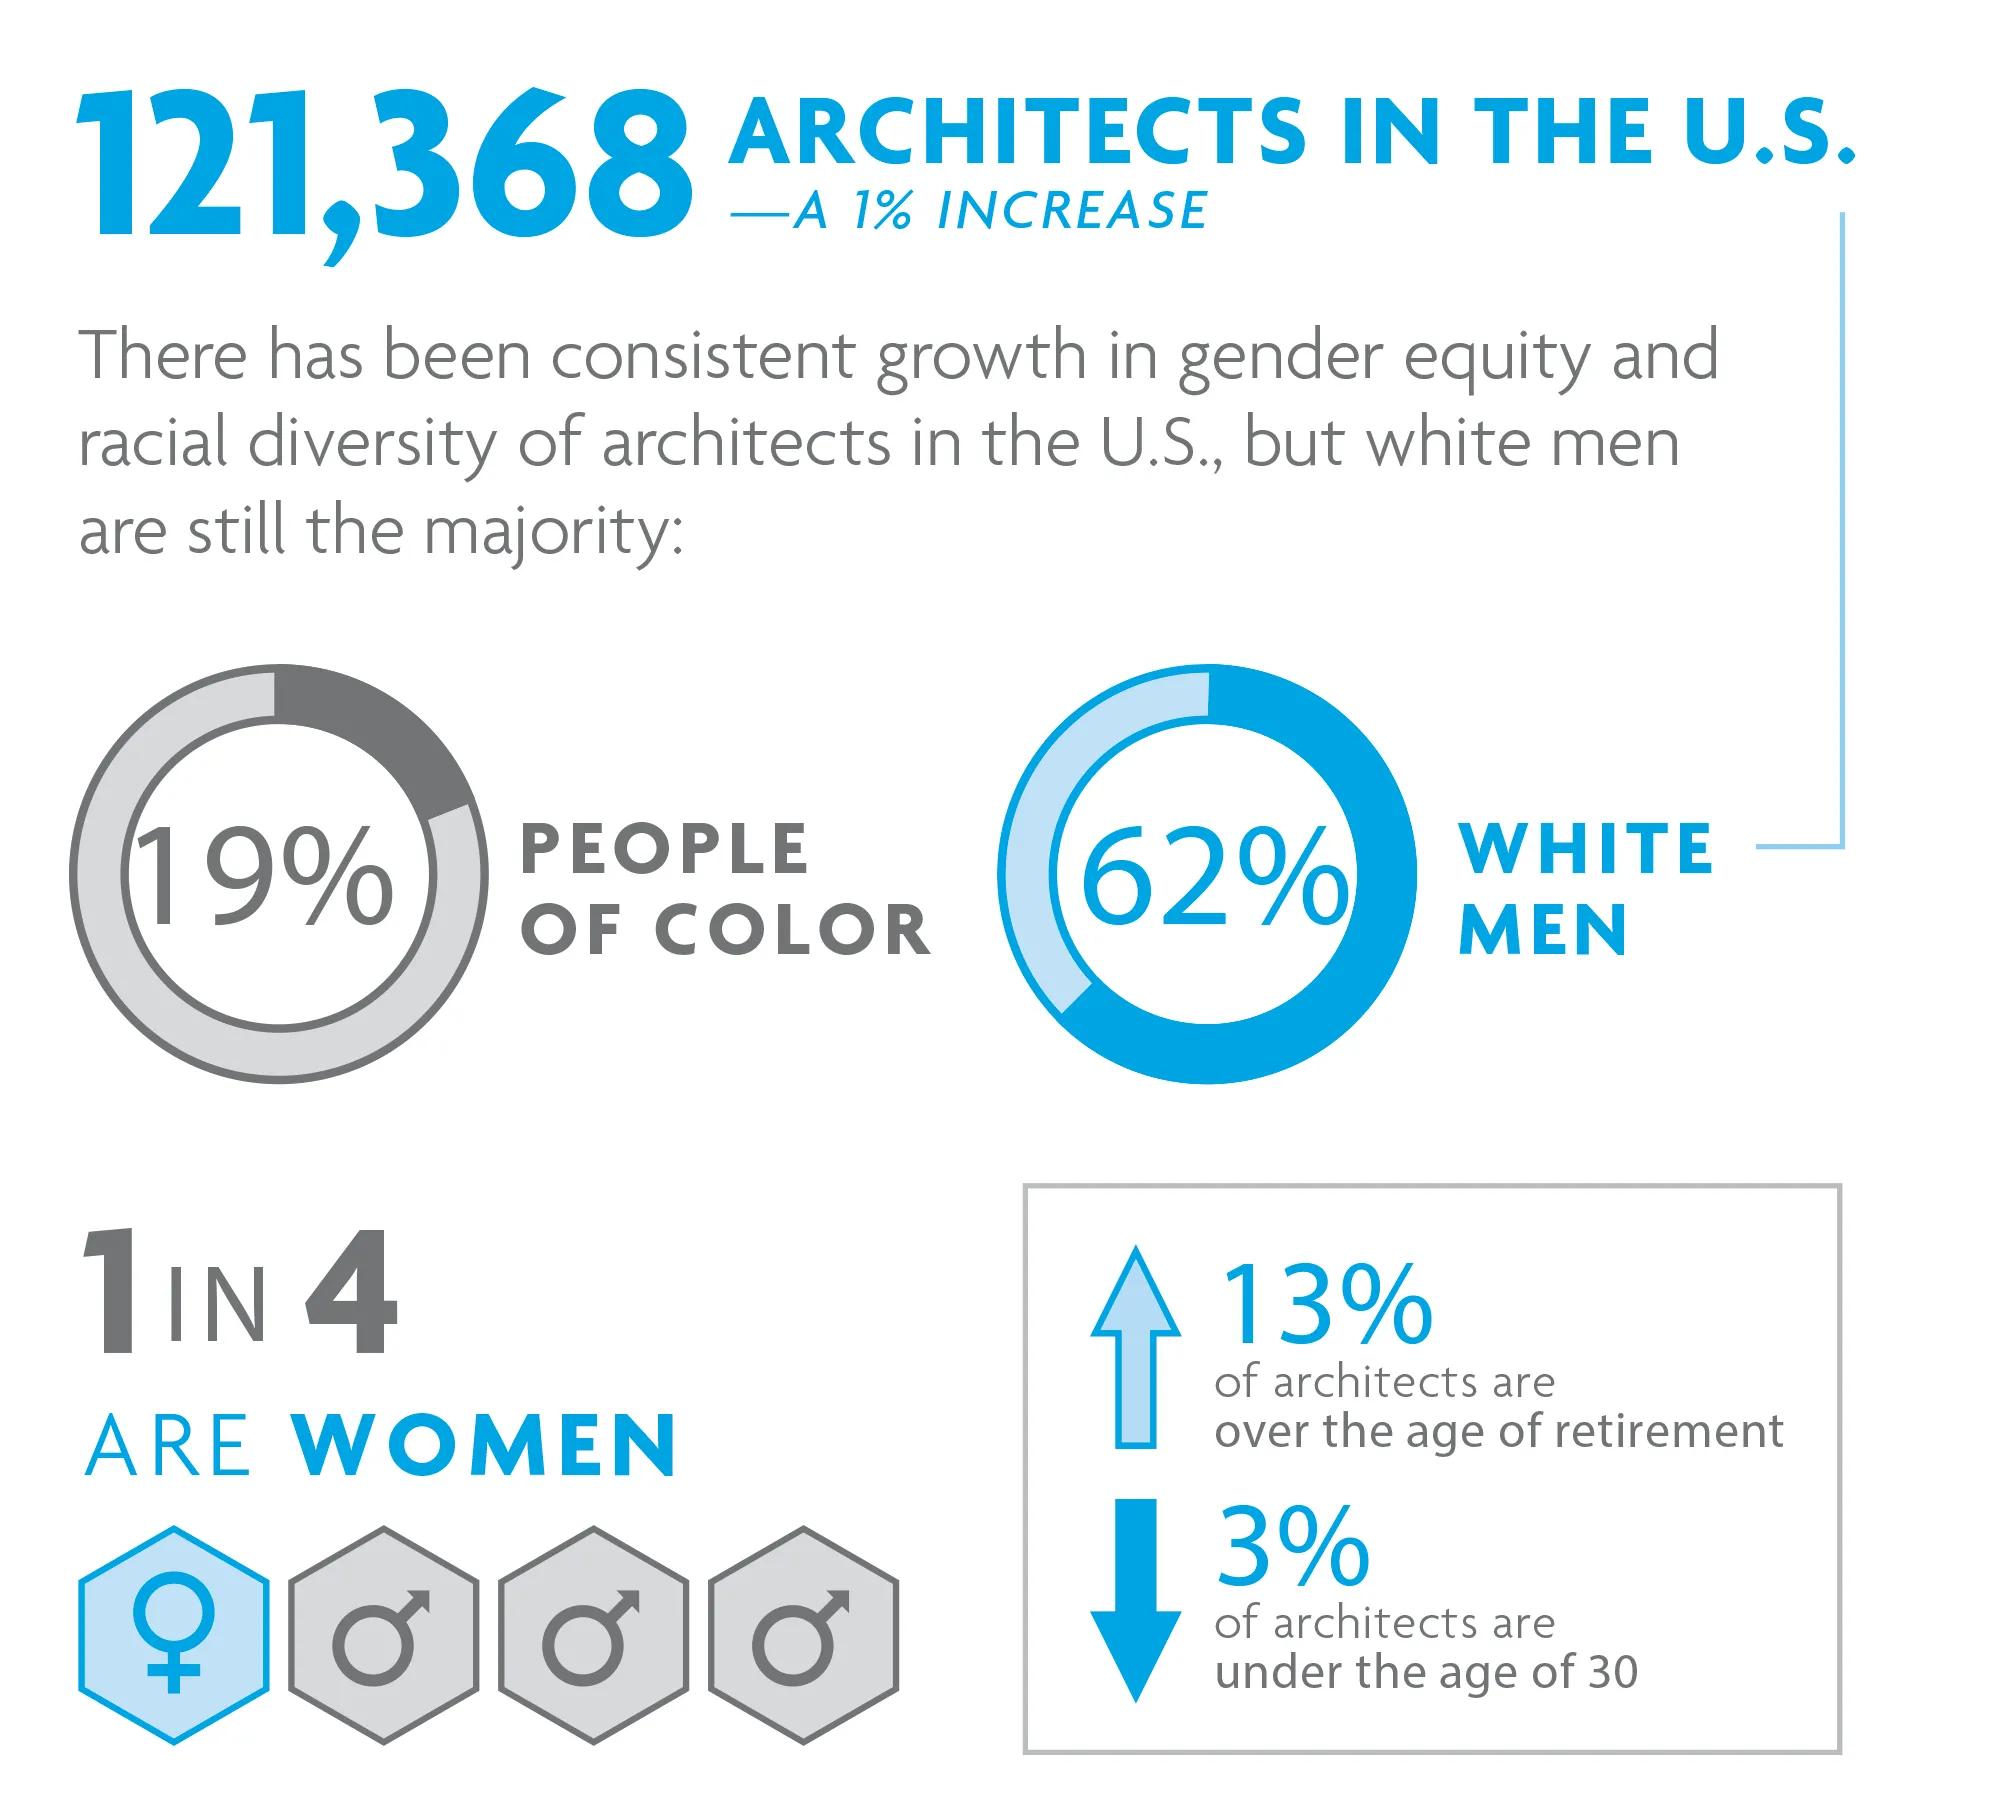 Gender and racial equity in architects is on the rise, but white men still make up the majority of practitioners. 